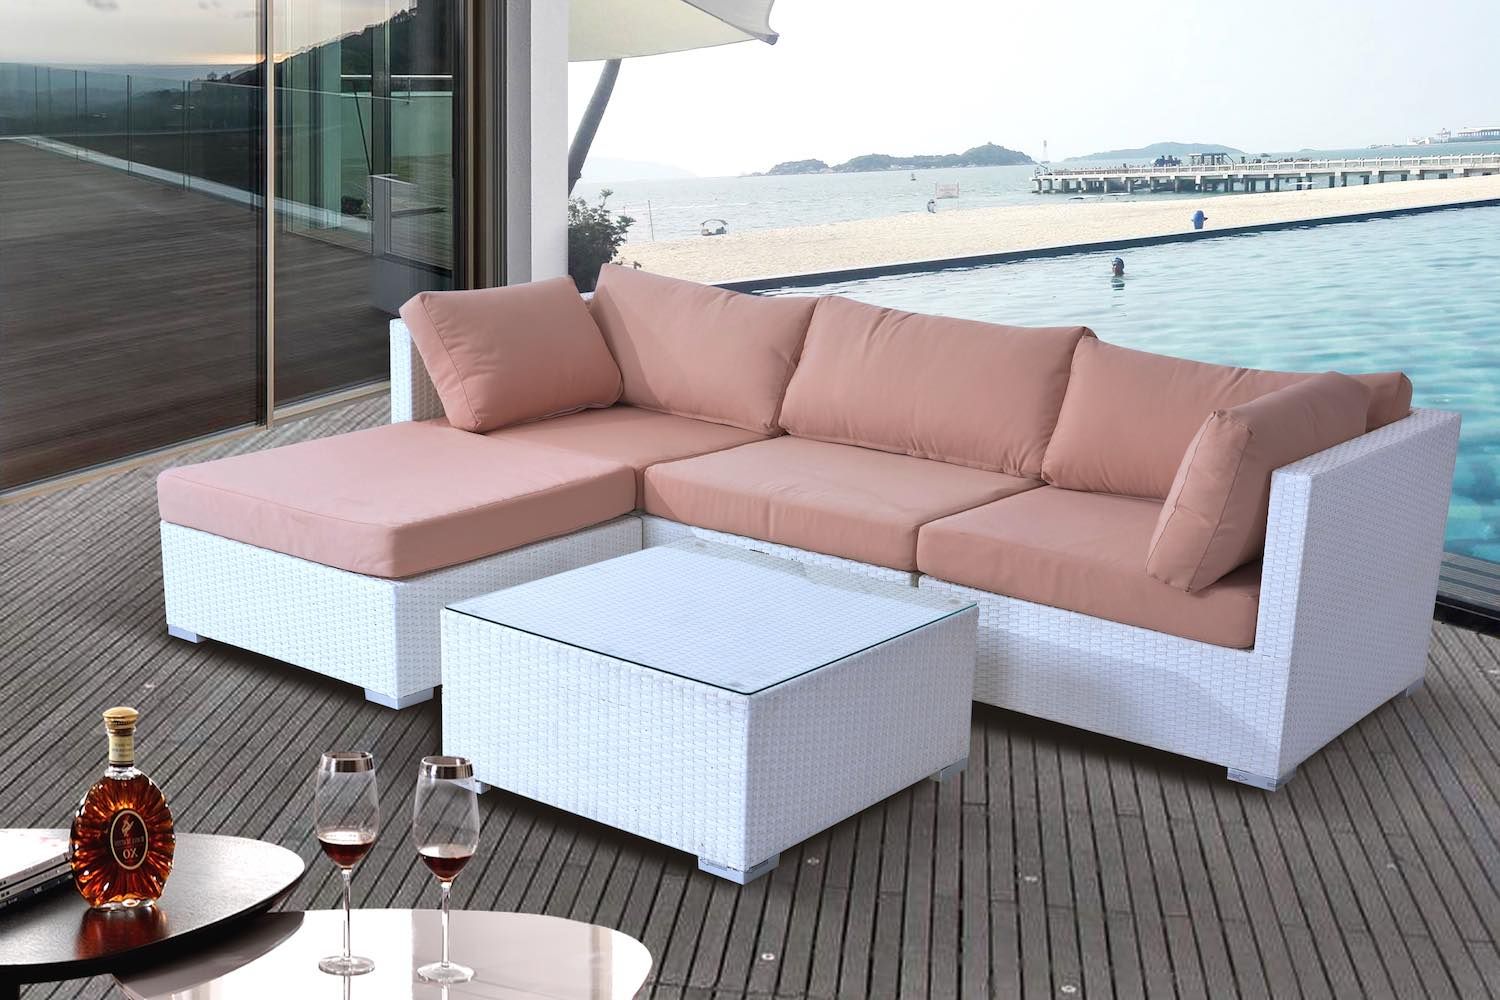 White Wicker Sectional Sofa Set – Patio Furniturevelago Throughout Outdoor Wicker Sectional Sofa Sets (View 7 of 15)